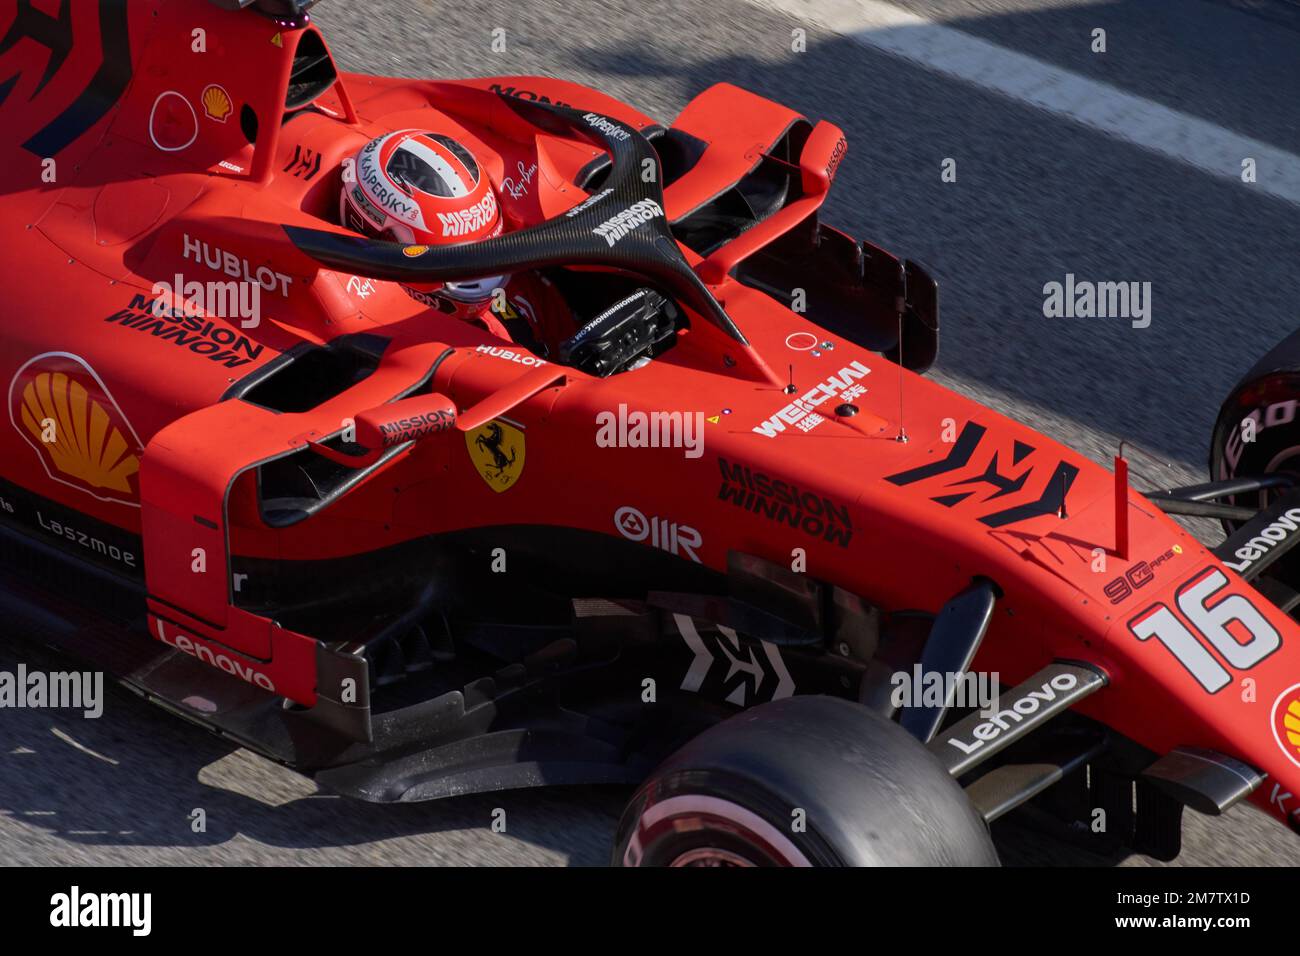 21.02.2019. Montmeló, Spain, Charles Leclerc entering the pitline of the Montmelo circuit in the 2019 pre-season tests Stock Photo